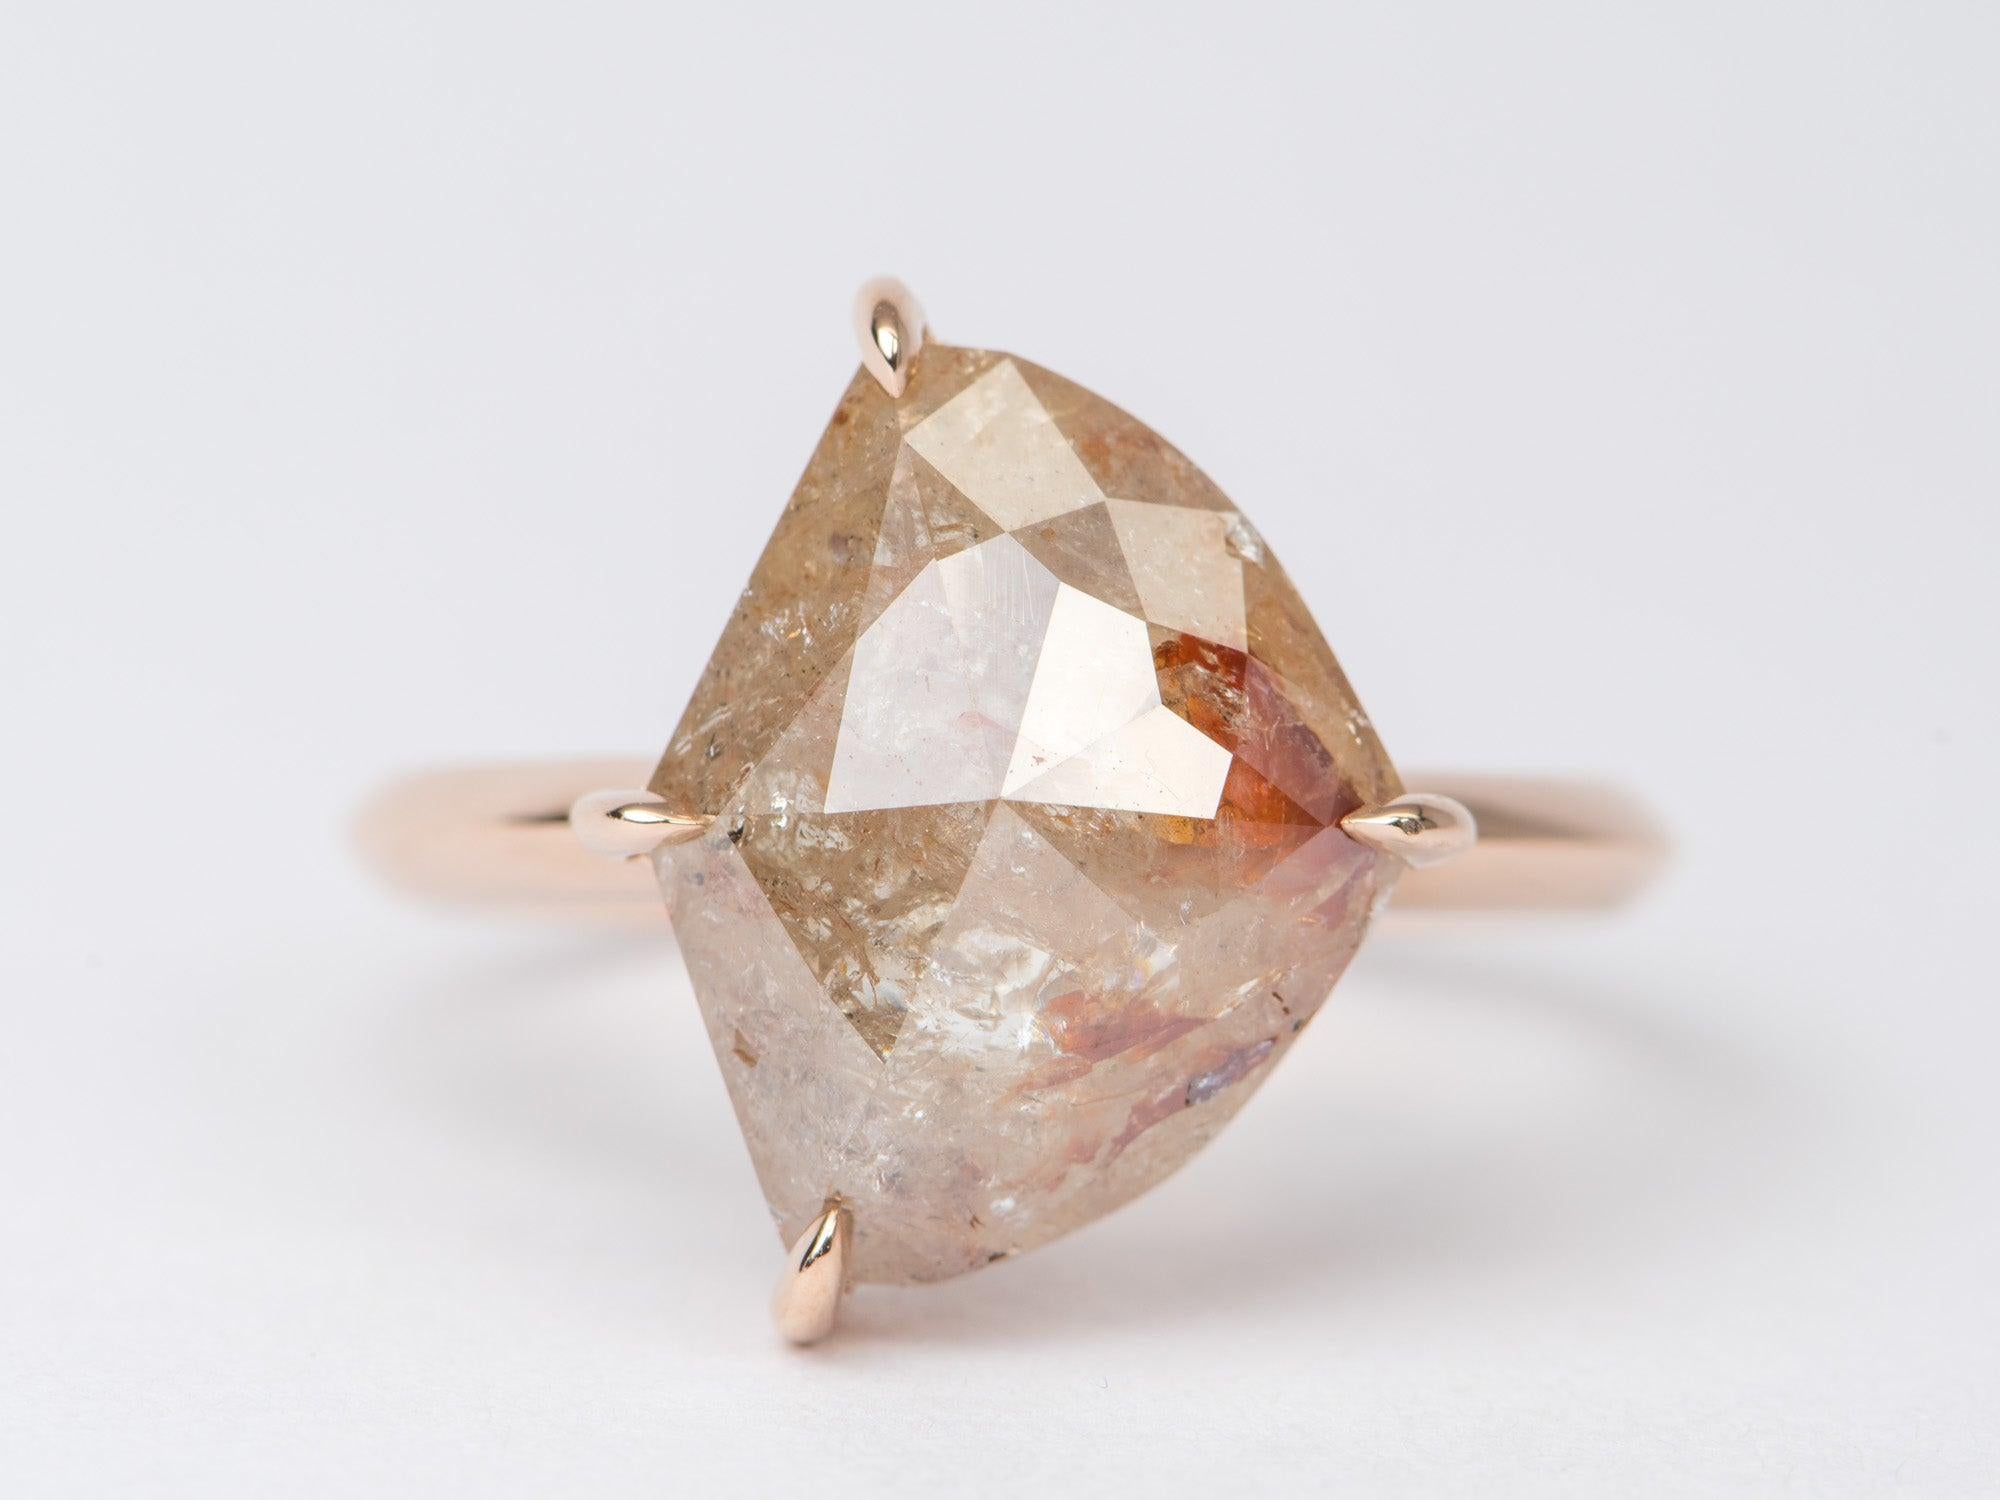 ♥ Solid 14K rose gold ring set with a geometric-shaped Koi Fish diamond
♥ This stunning diamond has excellent transparency with coral/orange color inclusions and is held with claw prongs
♥ The overall setting measures 16.2mm in width, 12.7mm in